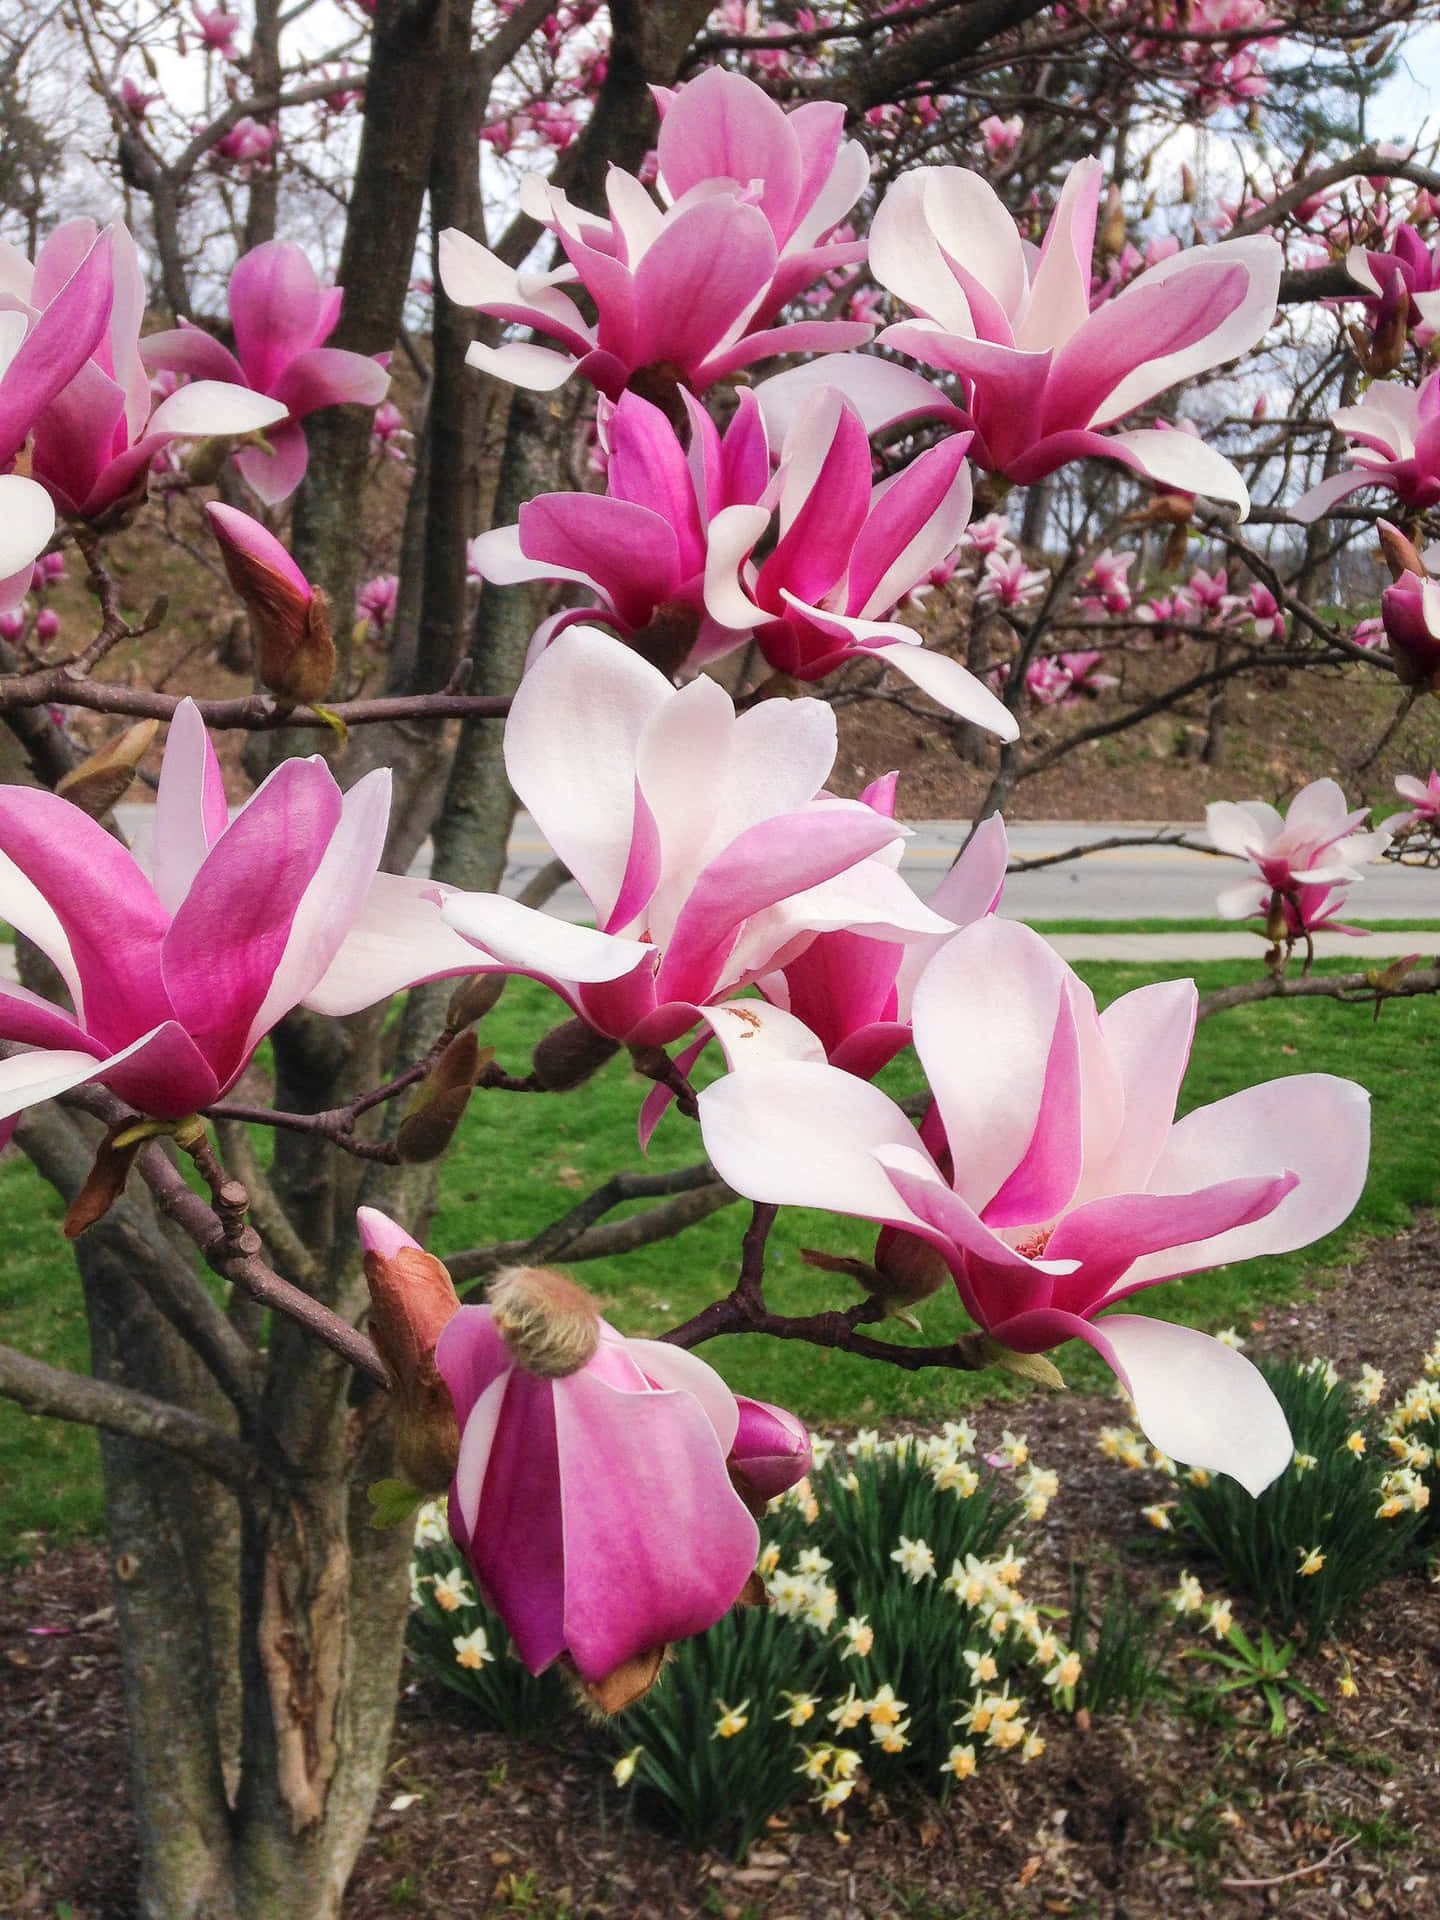 A picture of a blooming tulip tree, basking in the sun.